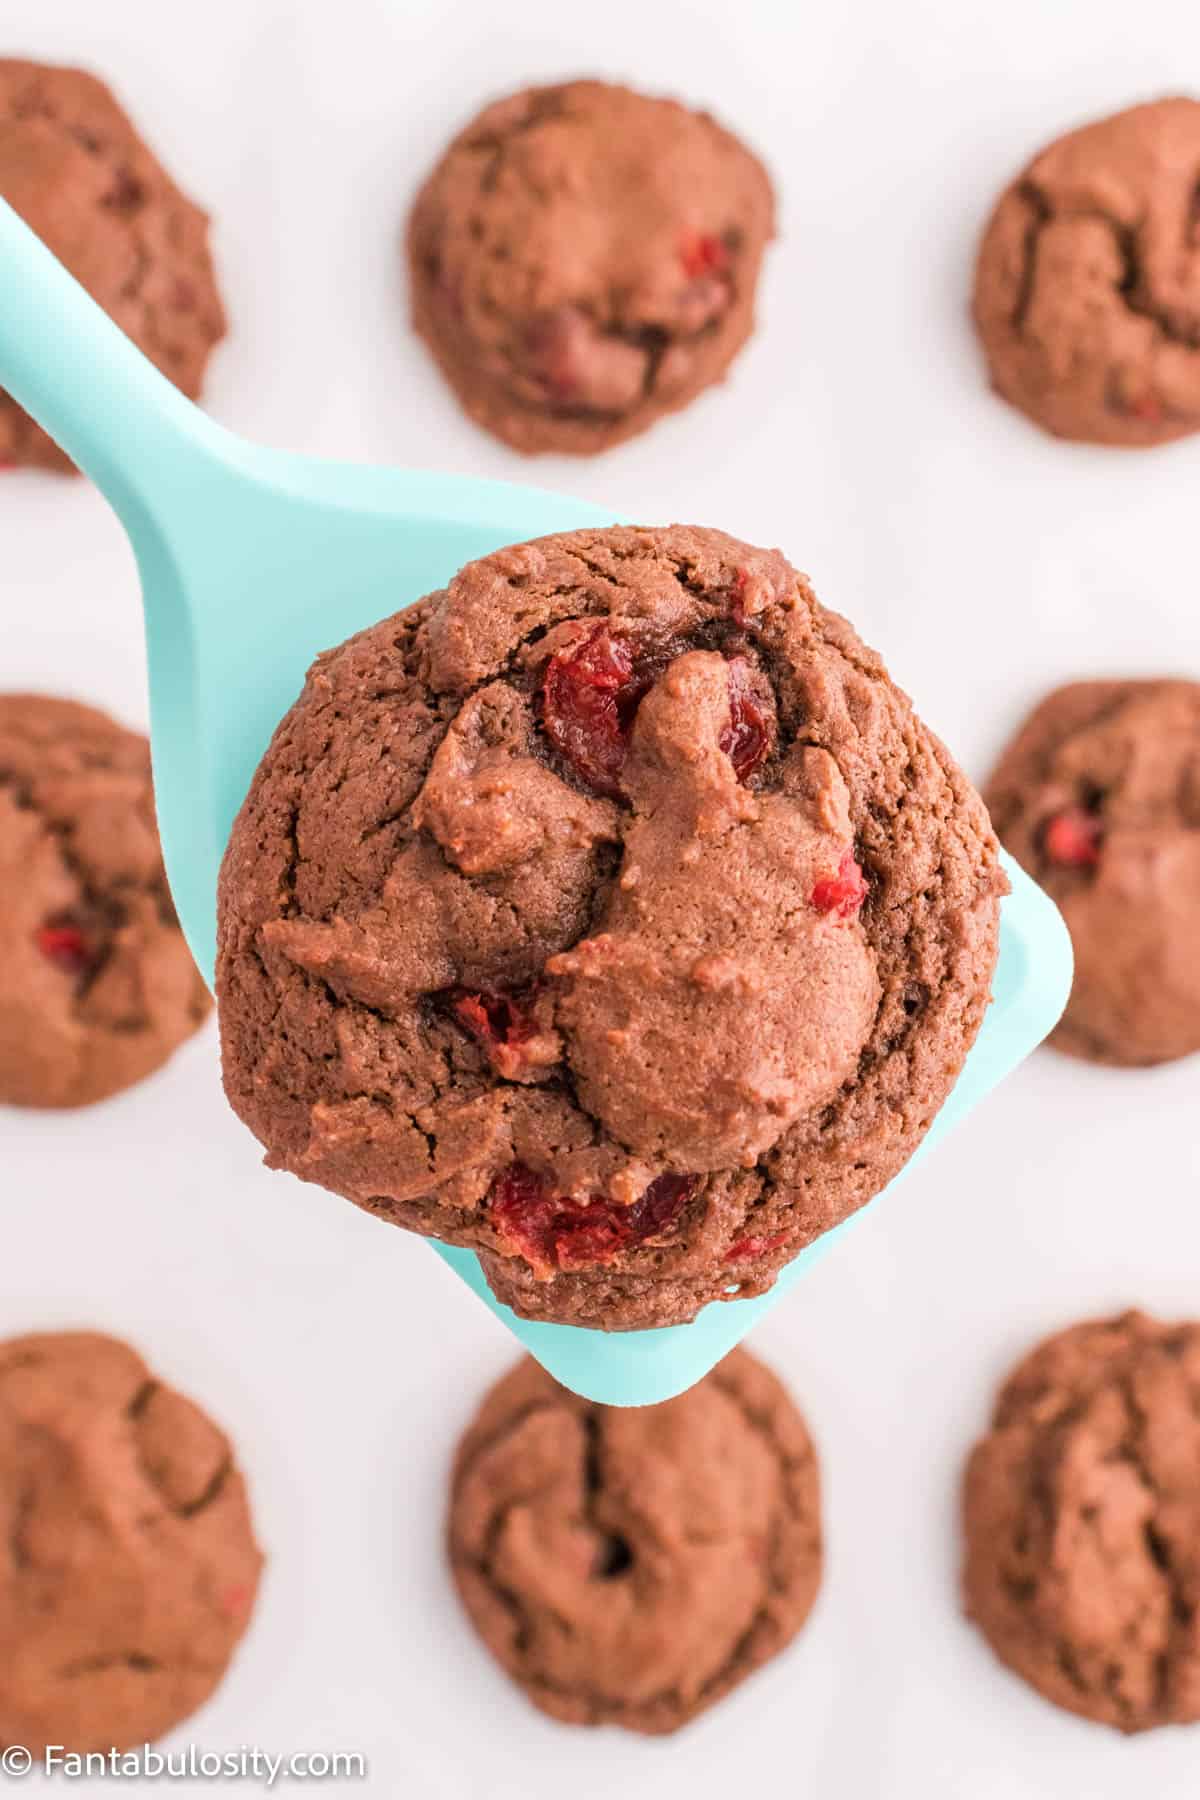 A chocolate cherry cookie on a spatula being held above the baking sheet filled with cookies.